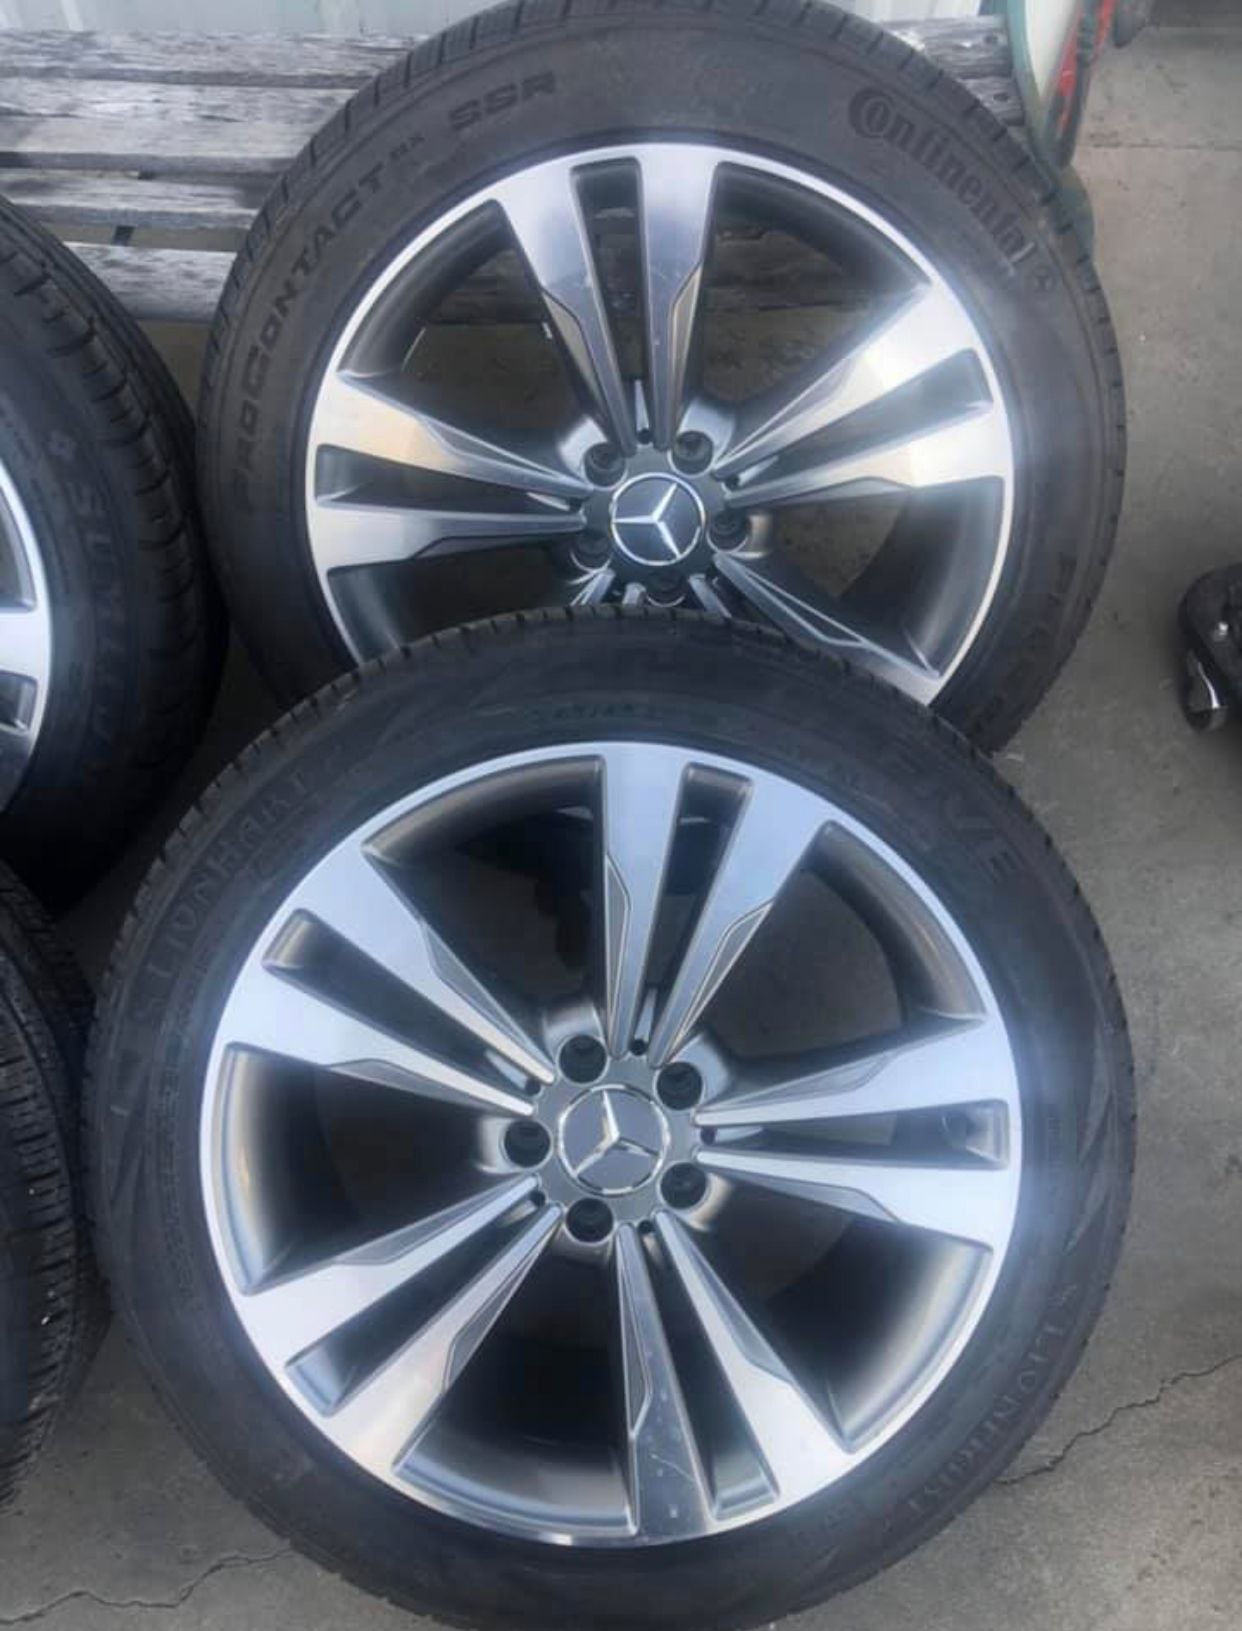 Wheels and Tires/Axles - Original Factory wheels set &tire - Used - 2014 to 2019 Mercedes-Benz S550 - Greensboro, NC 27407, United States